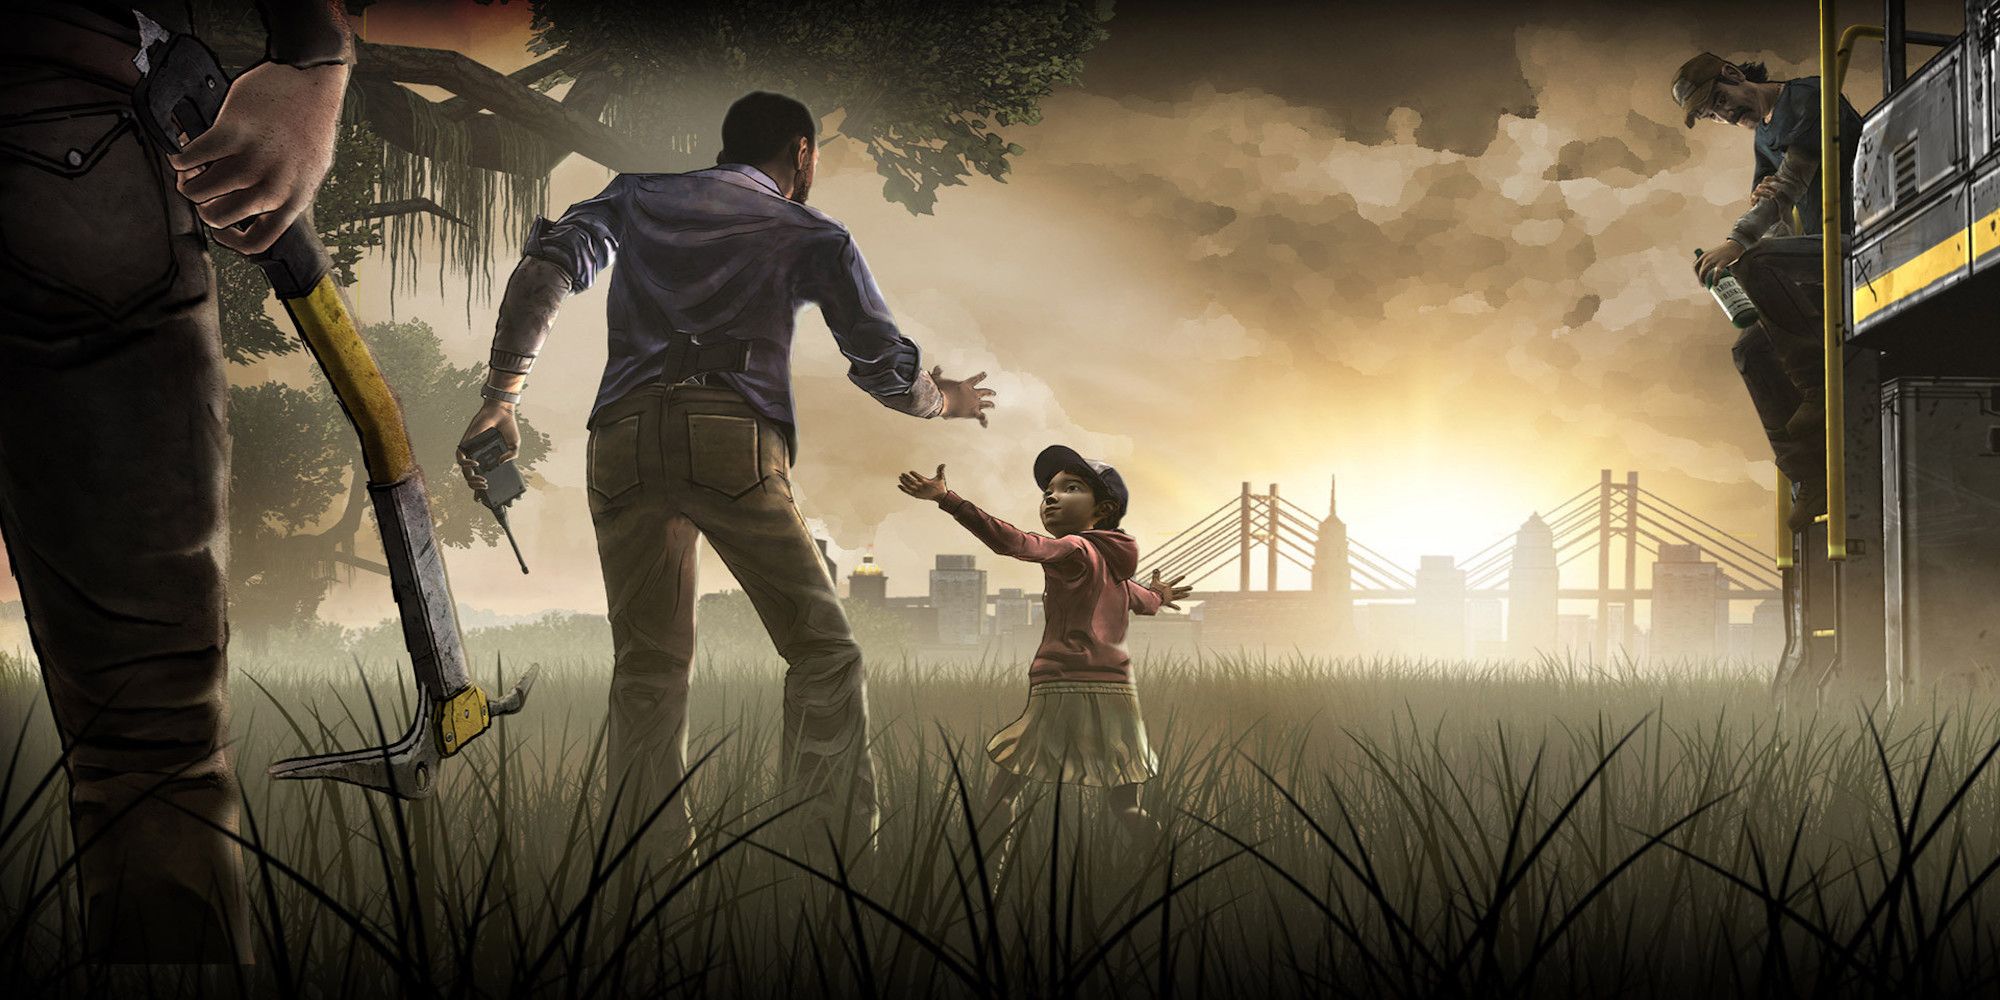 Promo art featuring characters in The Walking Dead A Telltale Games Series